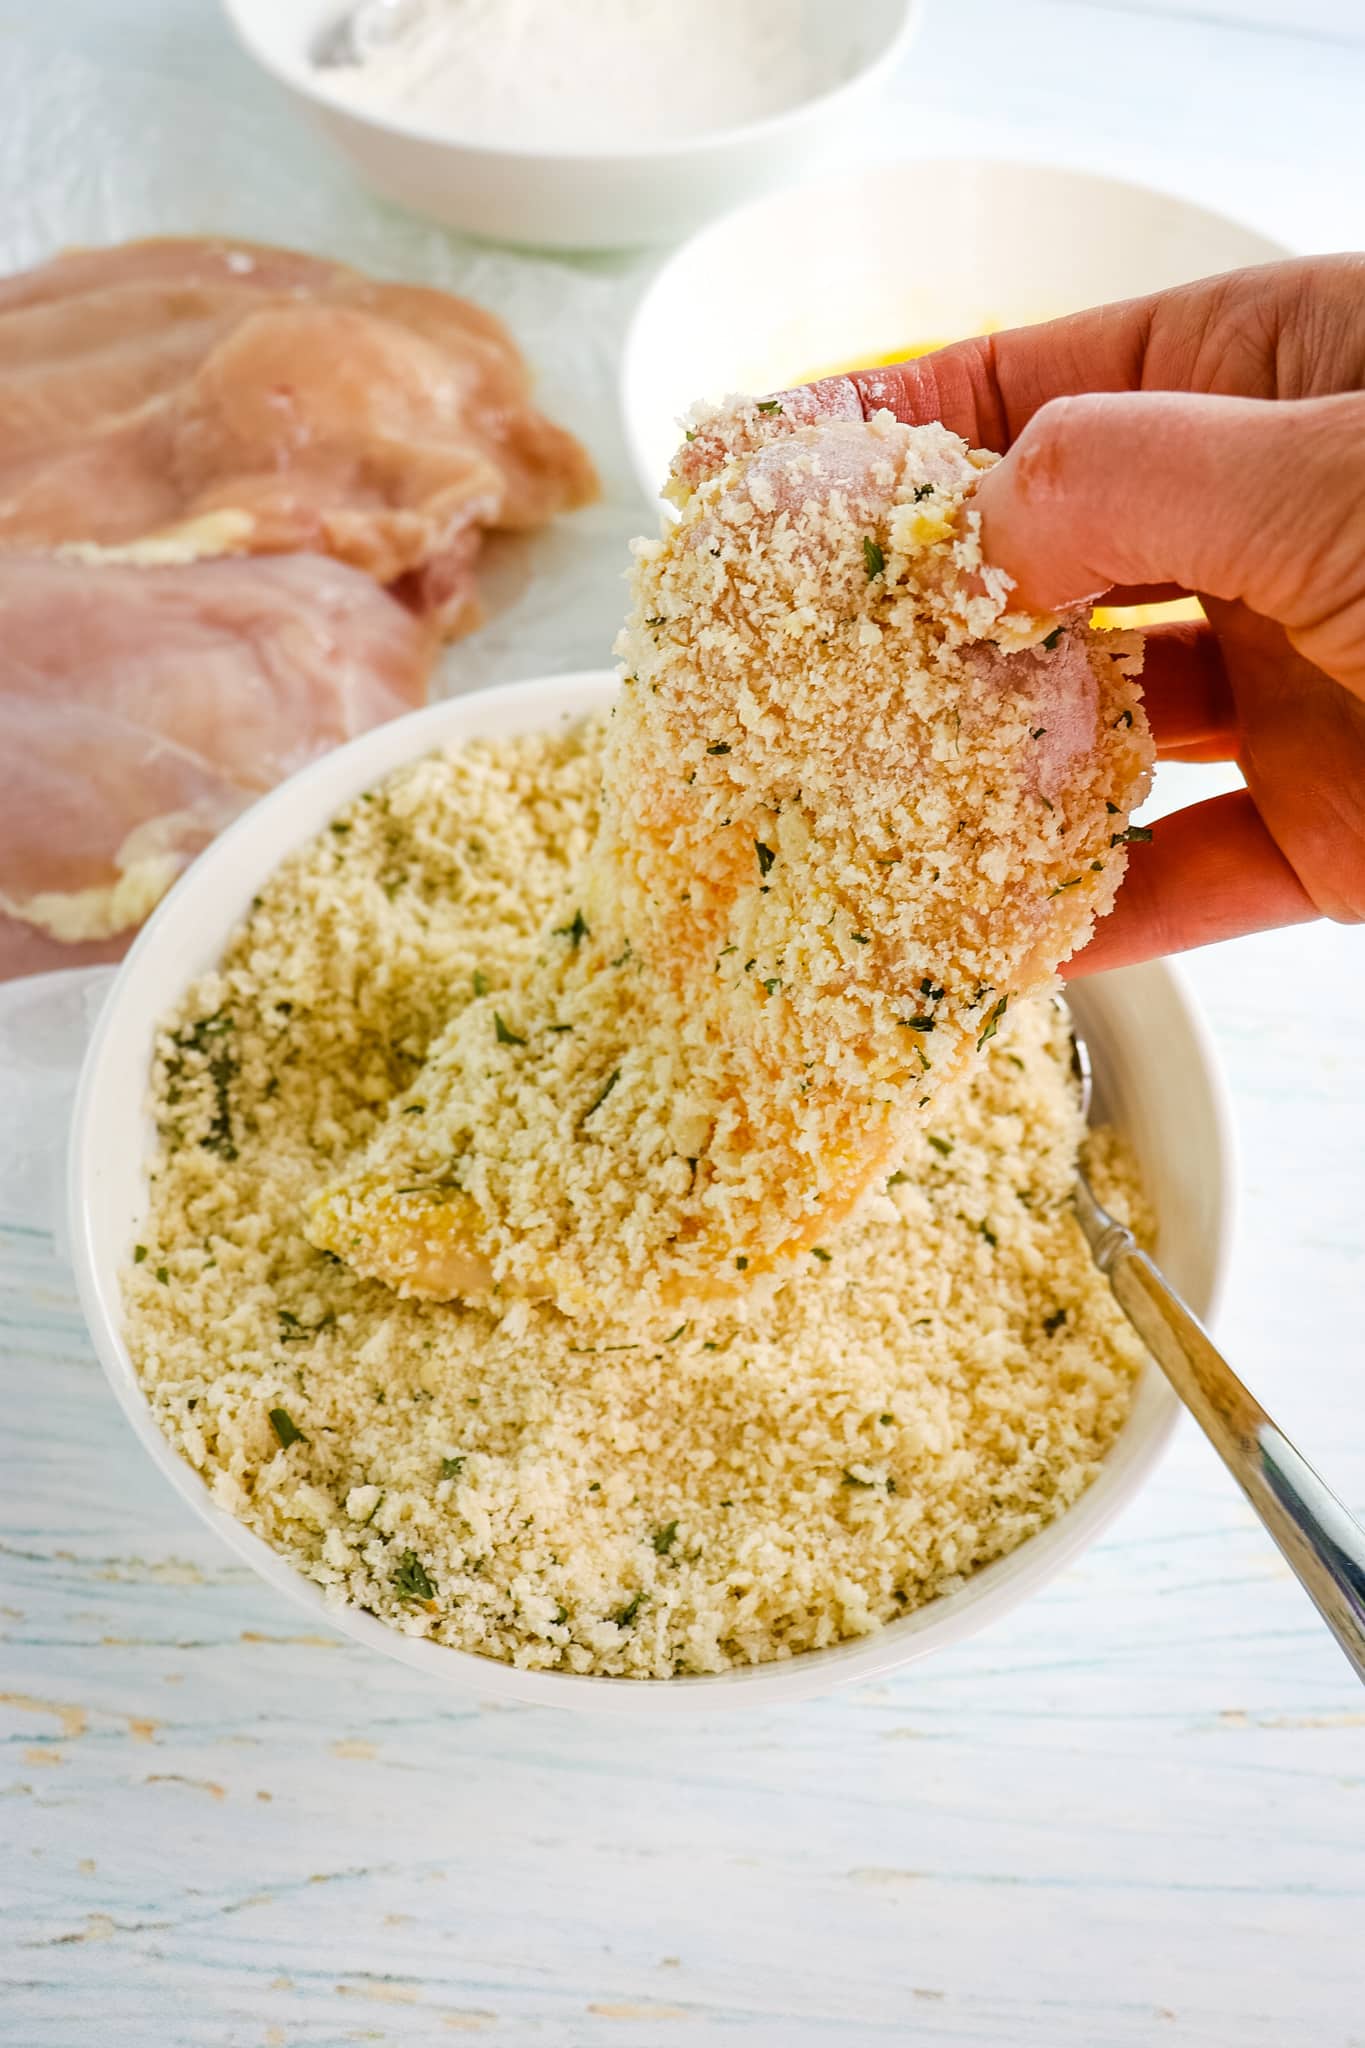 Chicken breast being dipped in Parmesan coating.